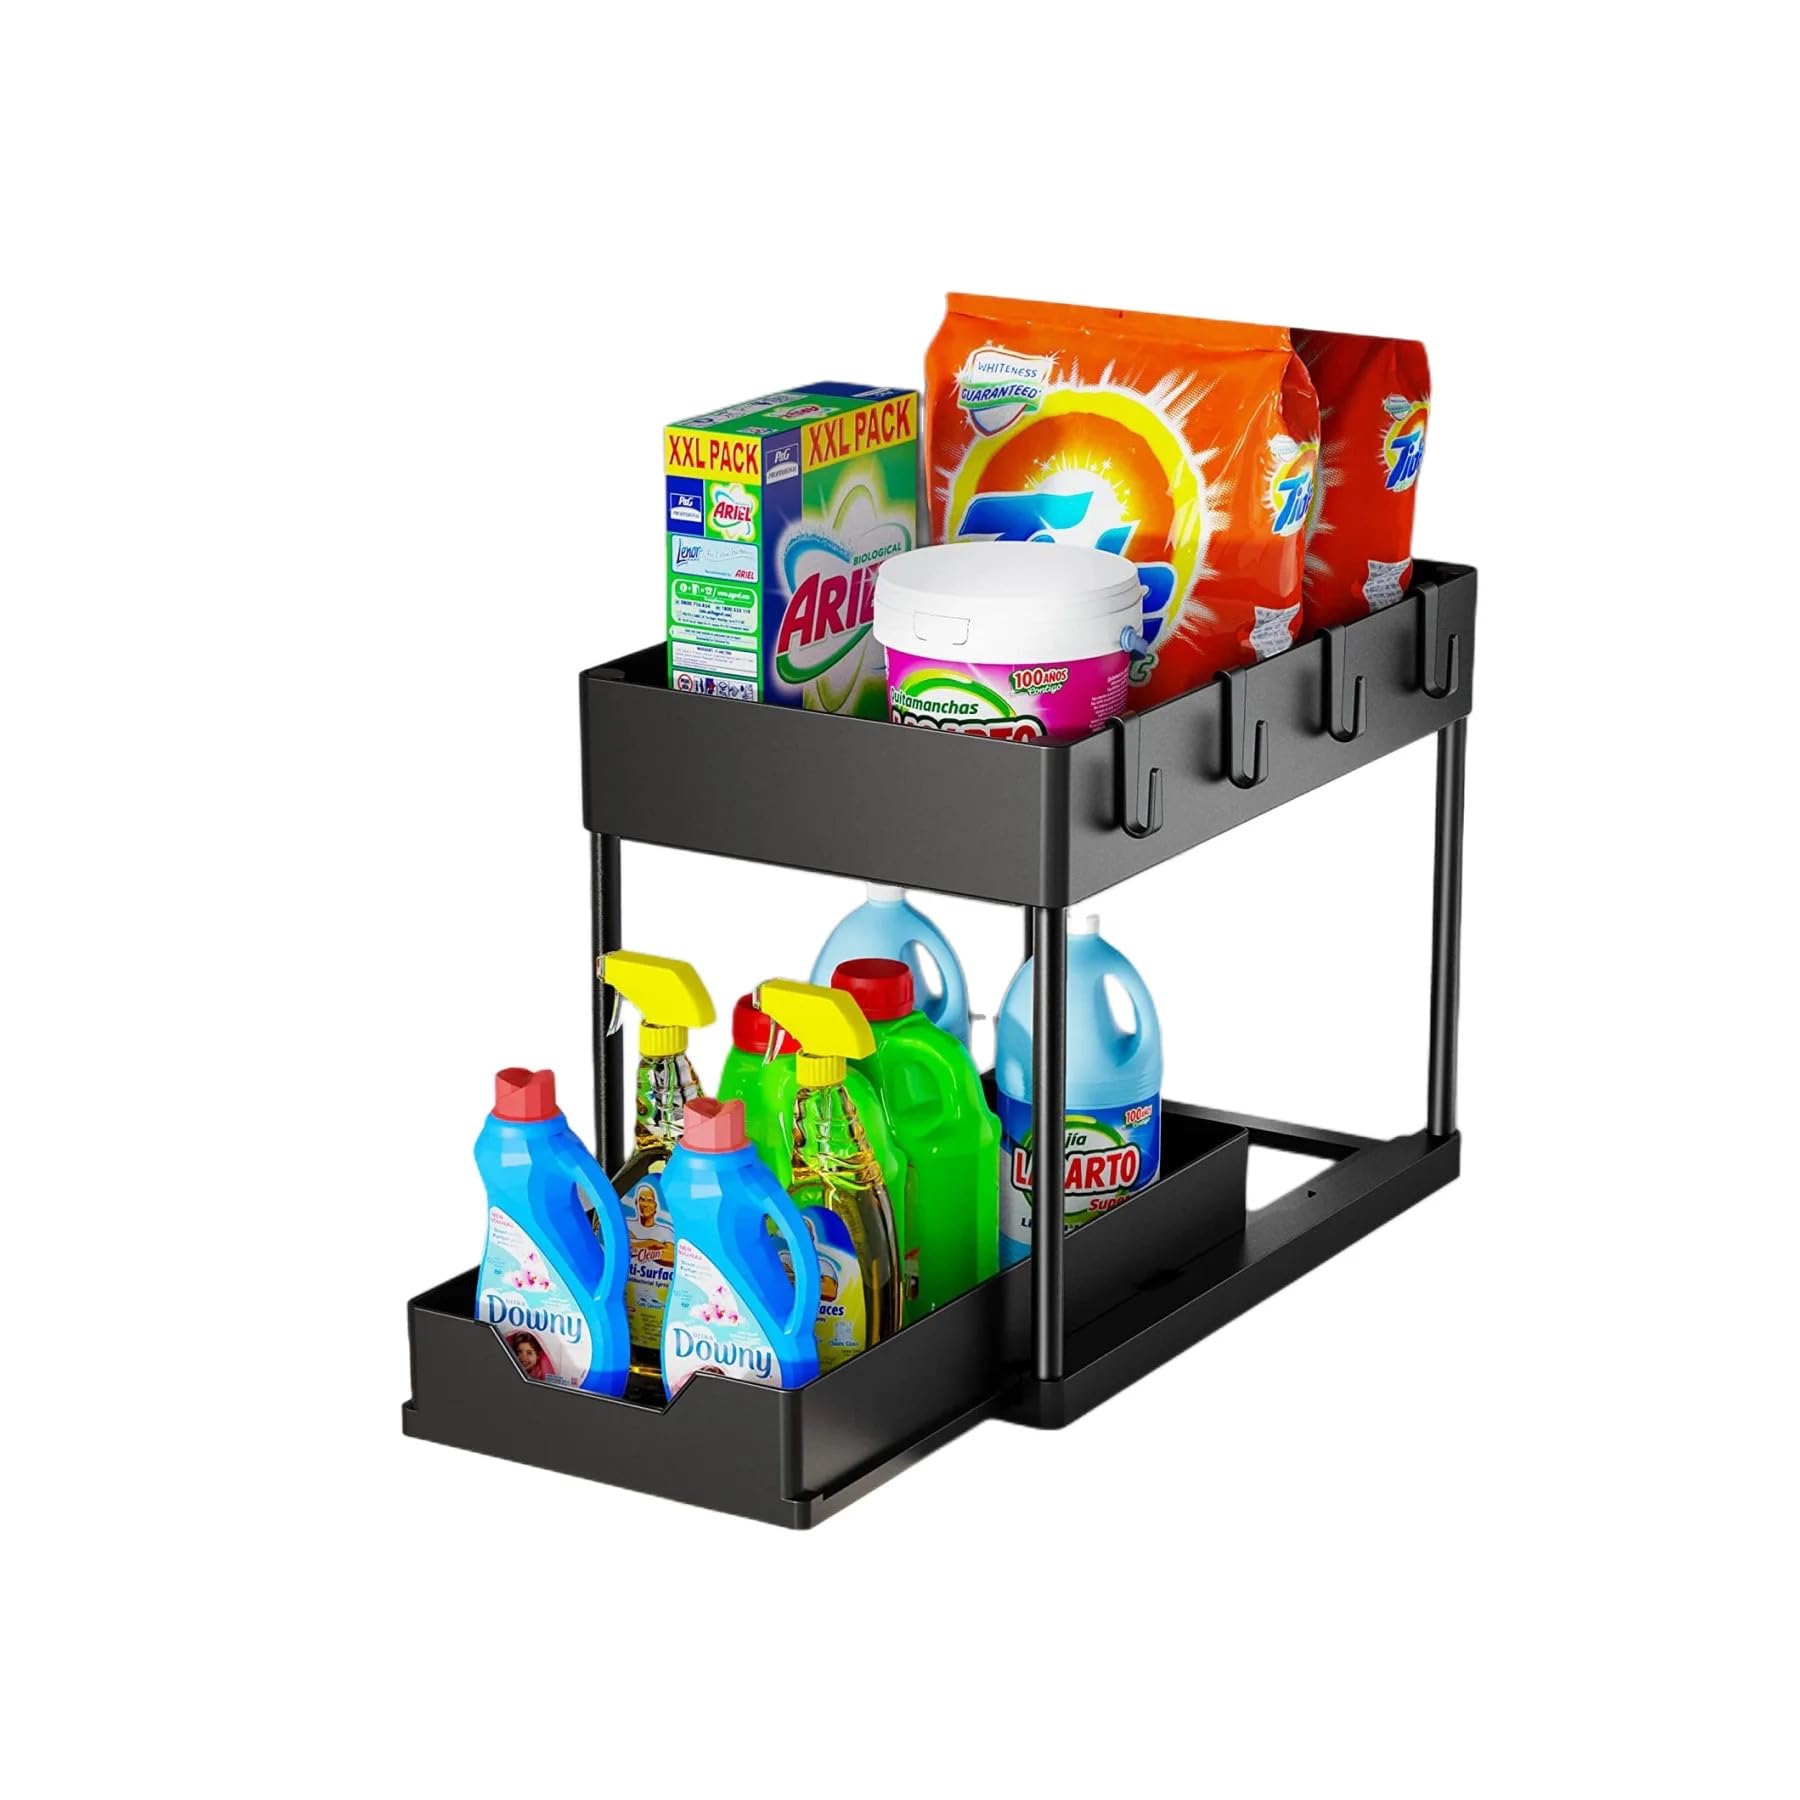 VIO 2-Tier Slide Out Organizer for Condiments, Toiletries, Cosmetics, Laundry Products, Multifunctional Sliding Shelf Storage Rack Kitchen Countertop, Under Sink, Bathroom, Home, Office (Black)